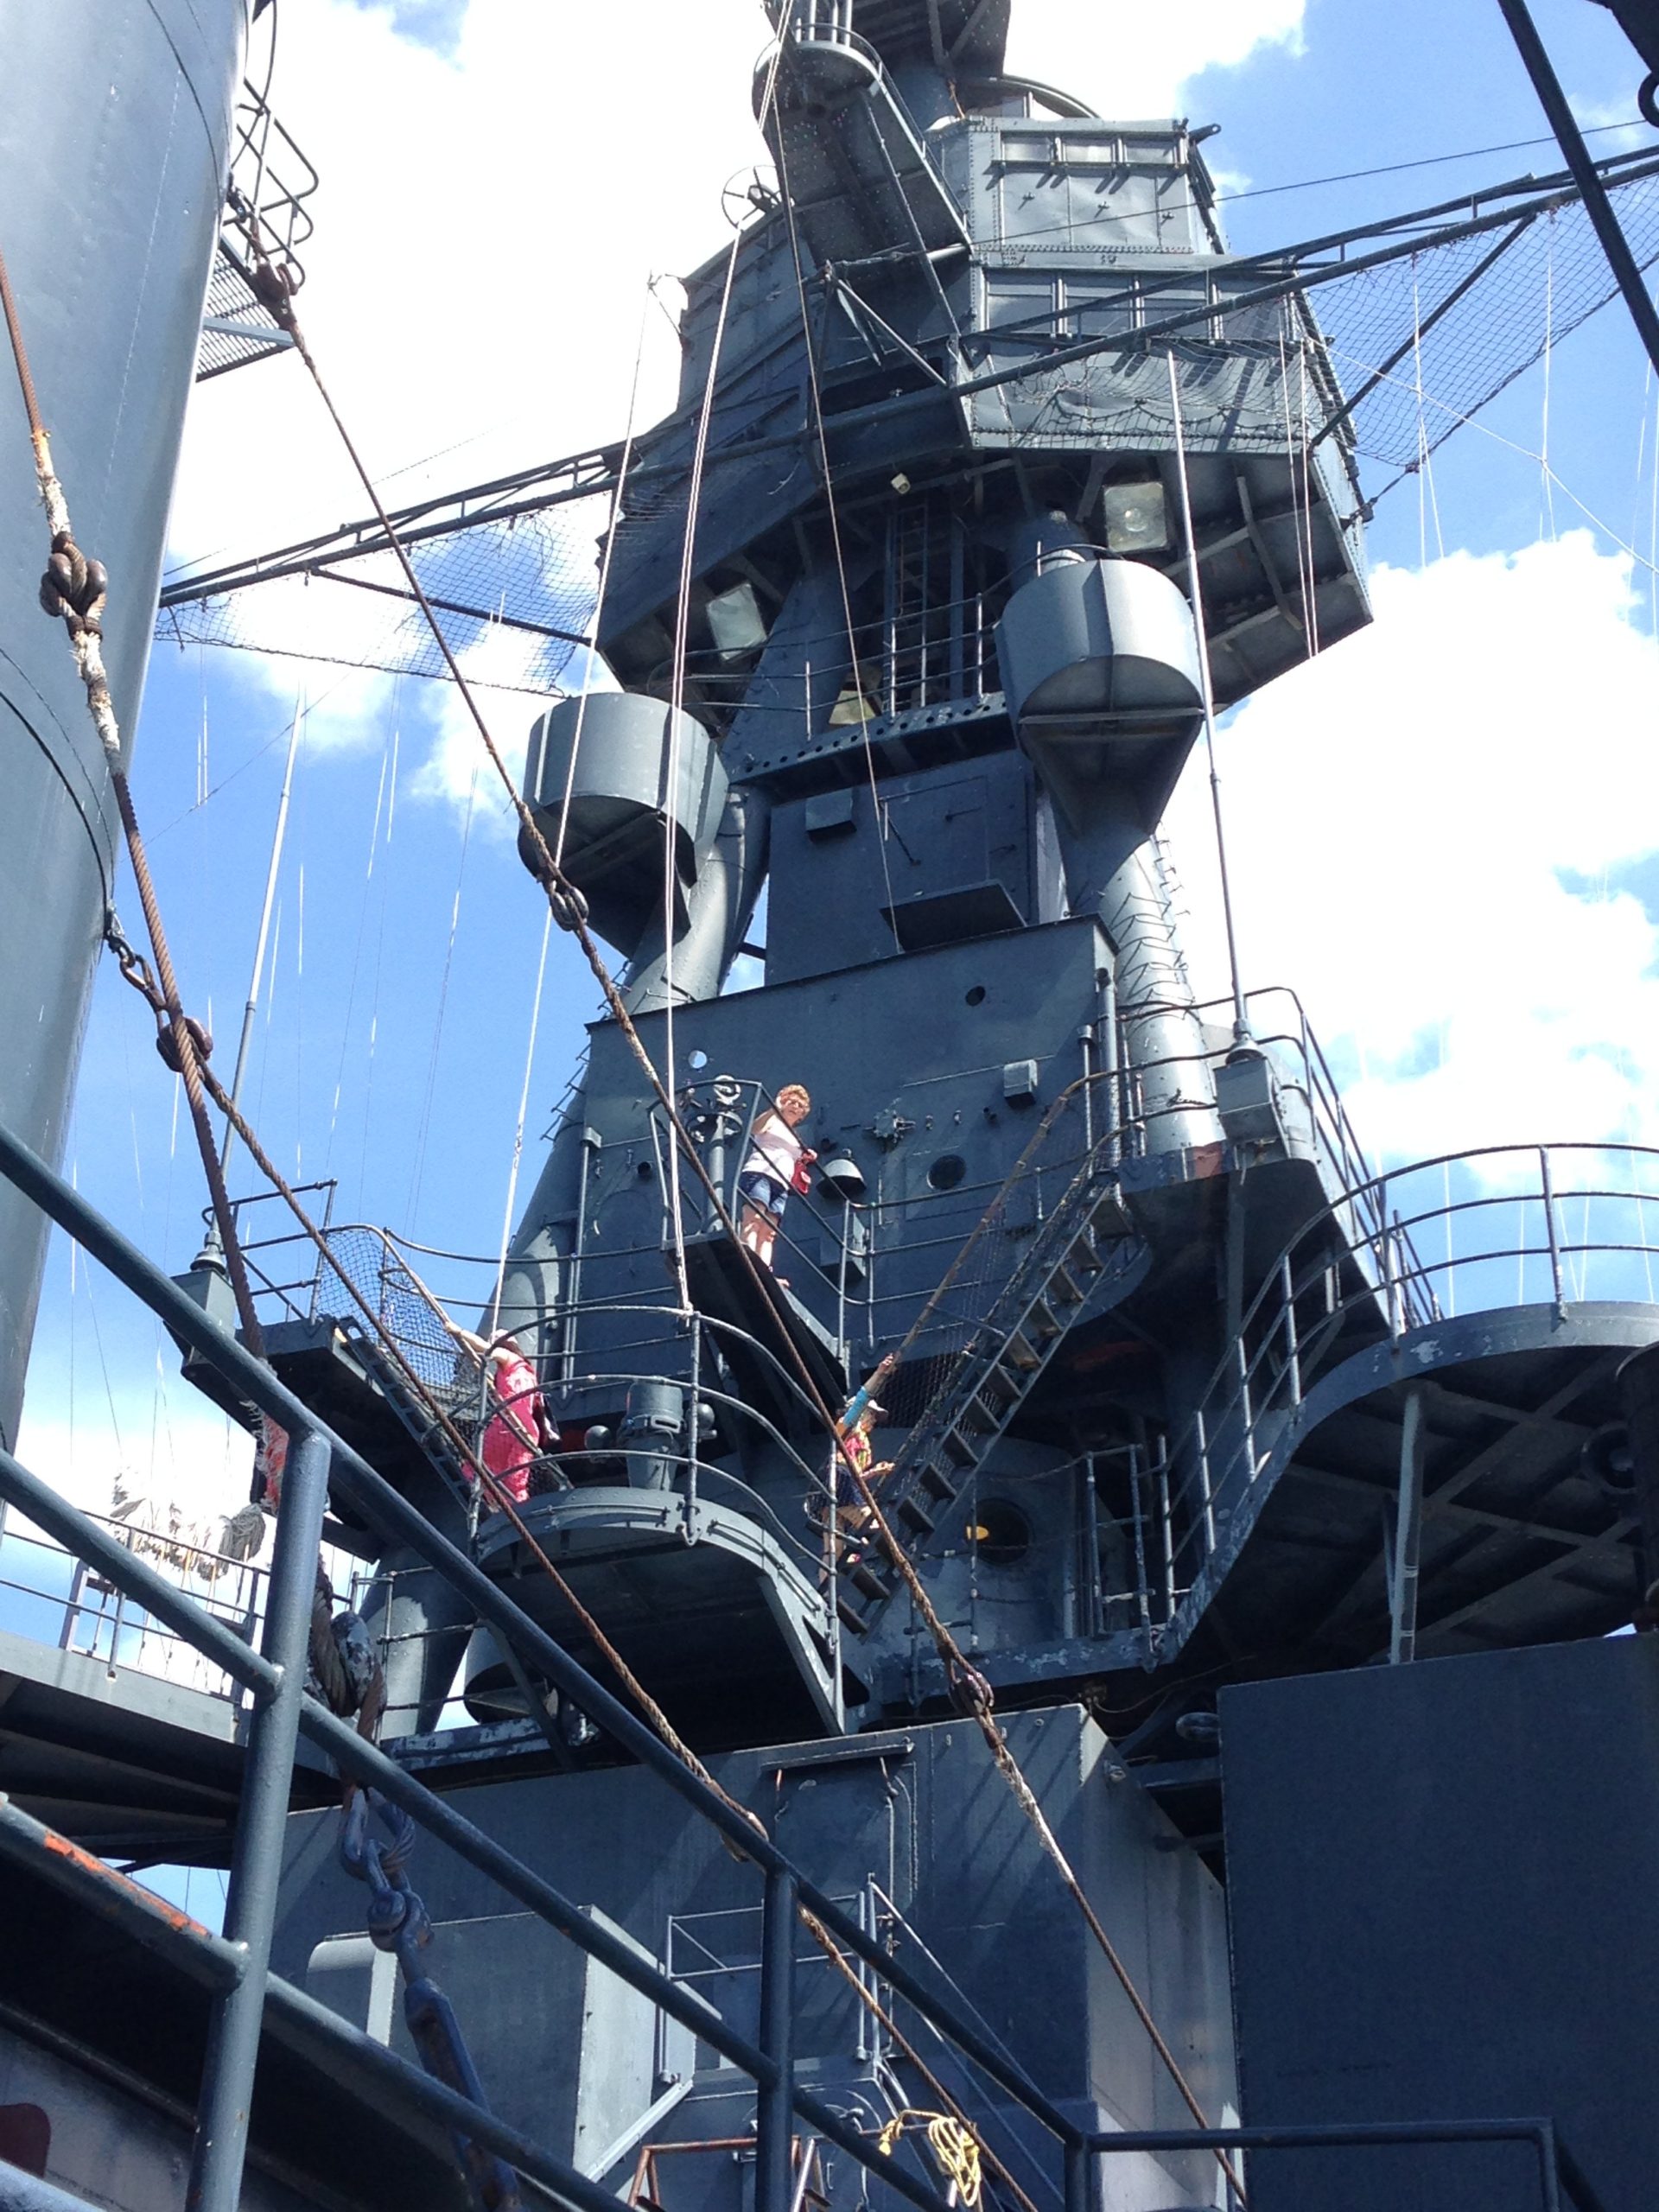 Battleship Texas (15 things to do in Houston for under $15)